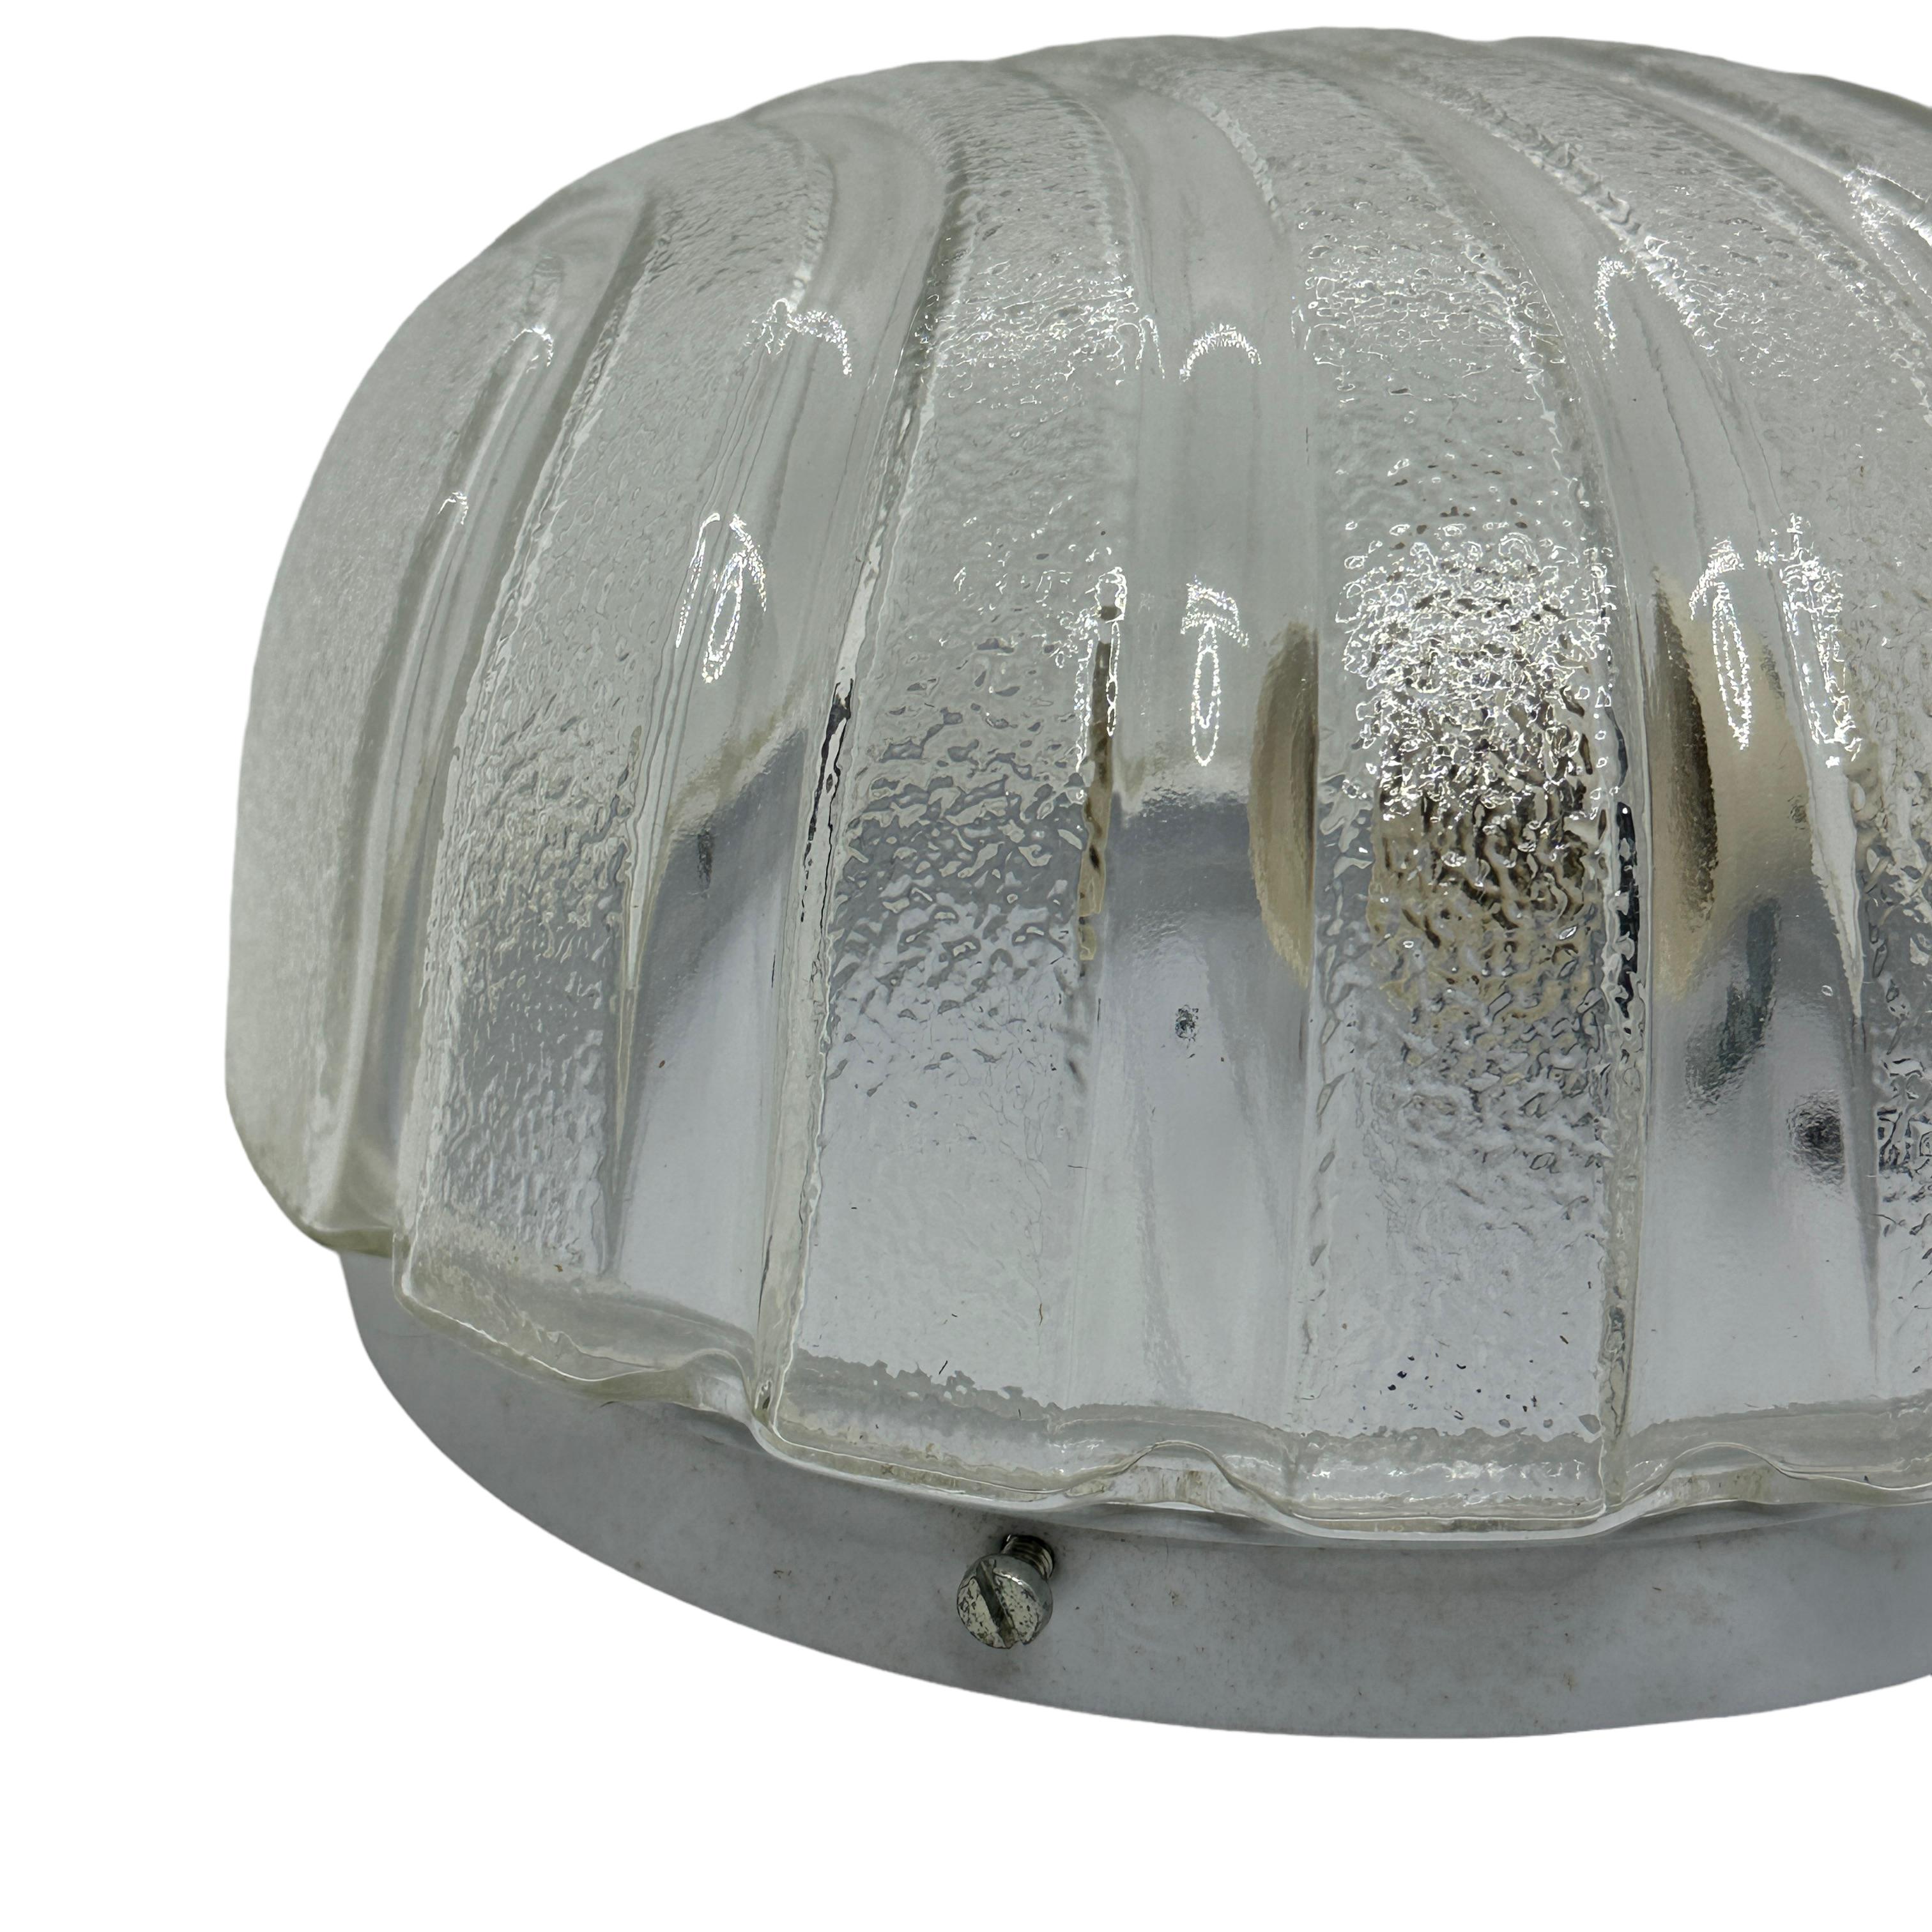 A petite gorgeous futuristic glass flush mount. It can be used also as a sconce. The light fixture requires one European E27 bulb, up to 60 watts. Clear ice glass, mounted on a white lacquered base. A nice addition to any room.